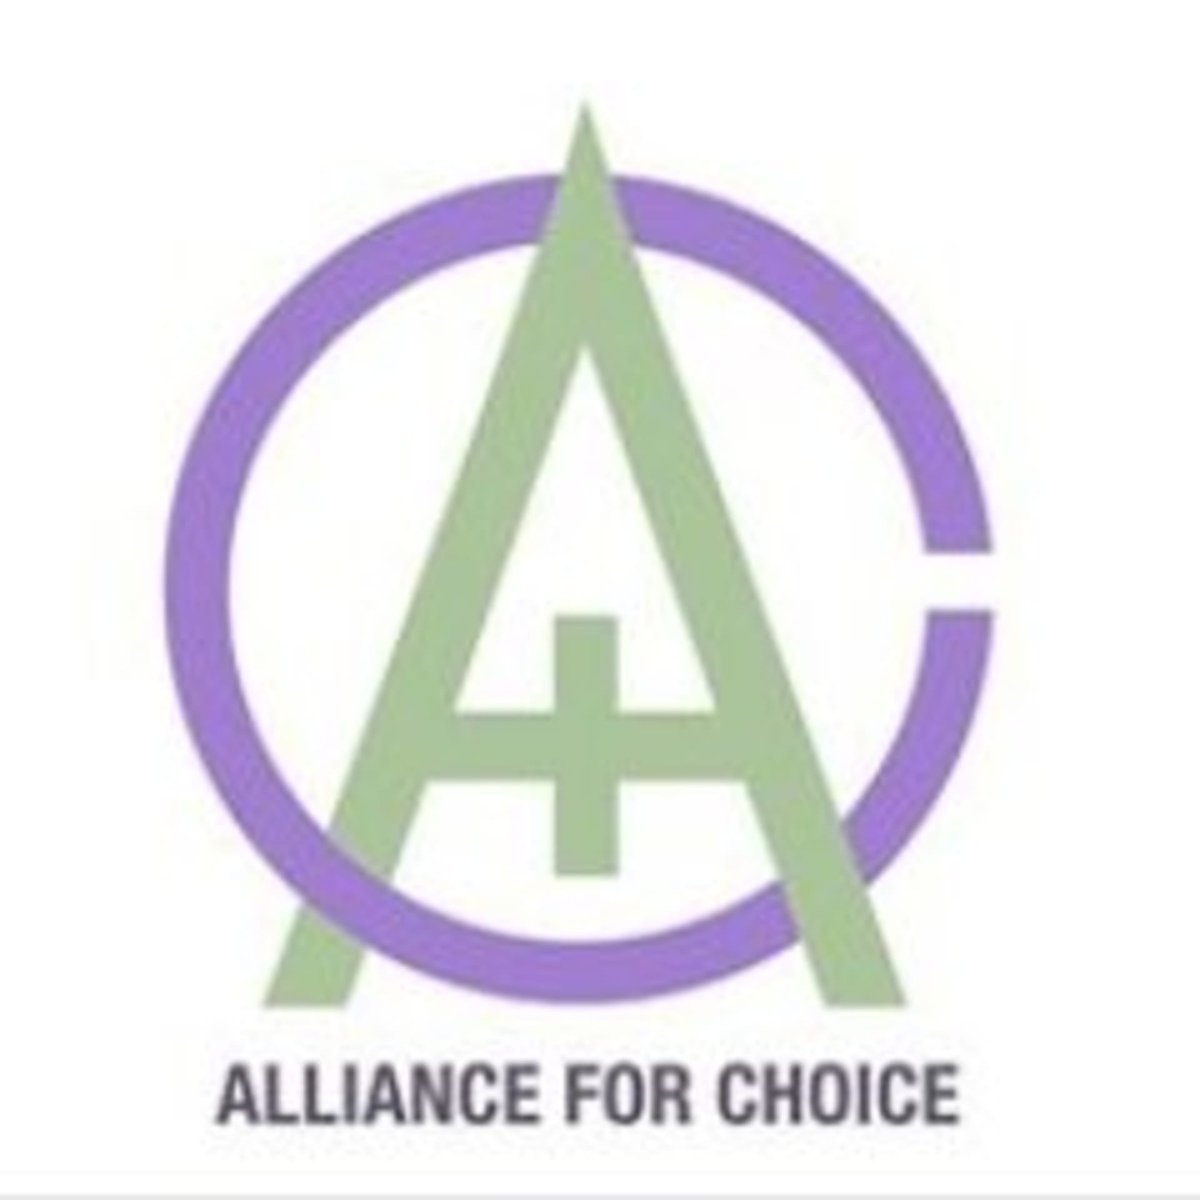  @All4Choice signed our open letter against the Nordic Model Alliance For Choice campaign for free safe legal abortion in Ireland North & South. Read the letter here  https://decrimnow.org.uk/open-letter-on-the-nordic-model/  #notonordicmodel